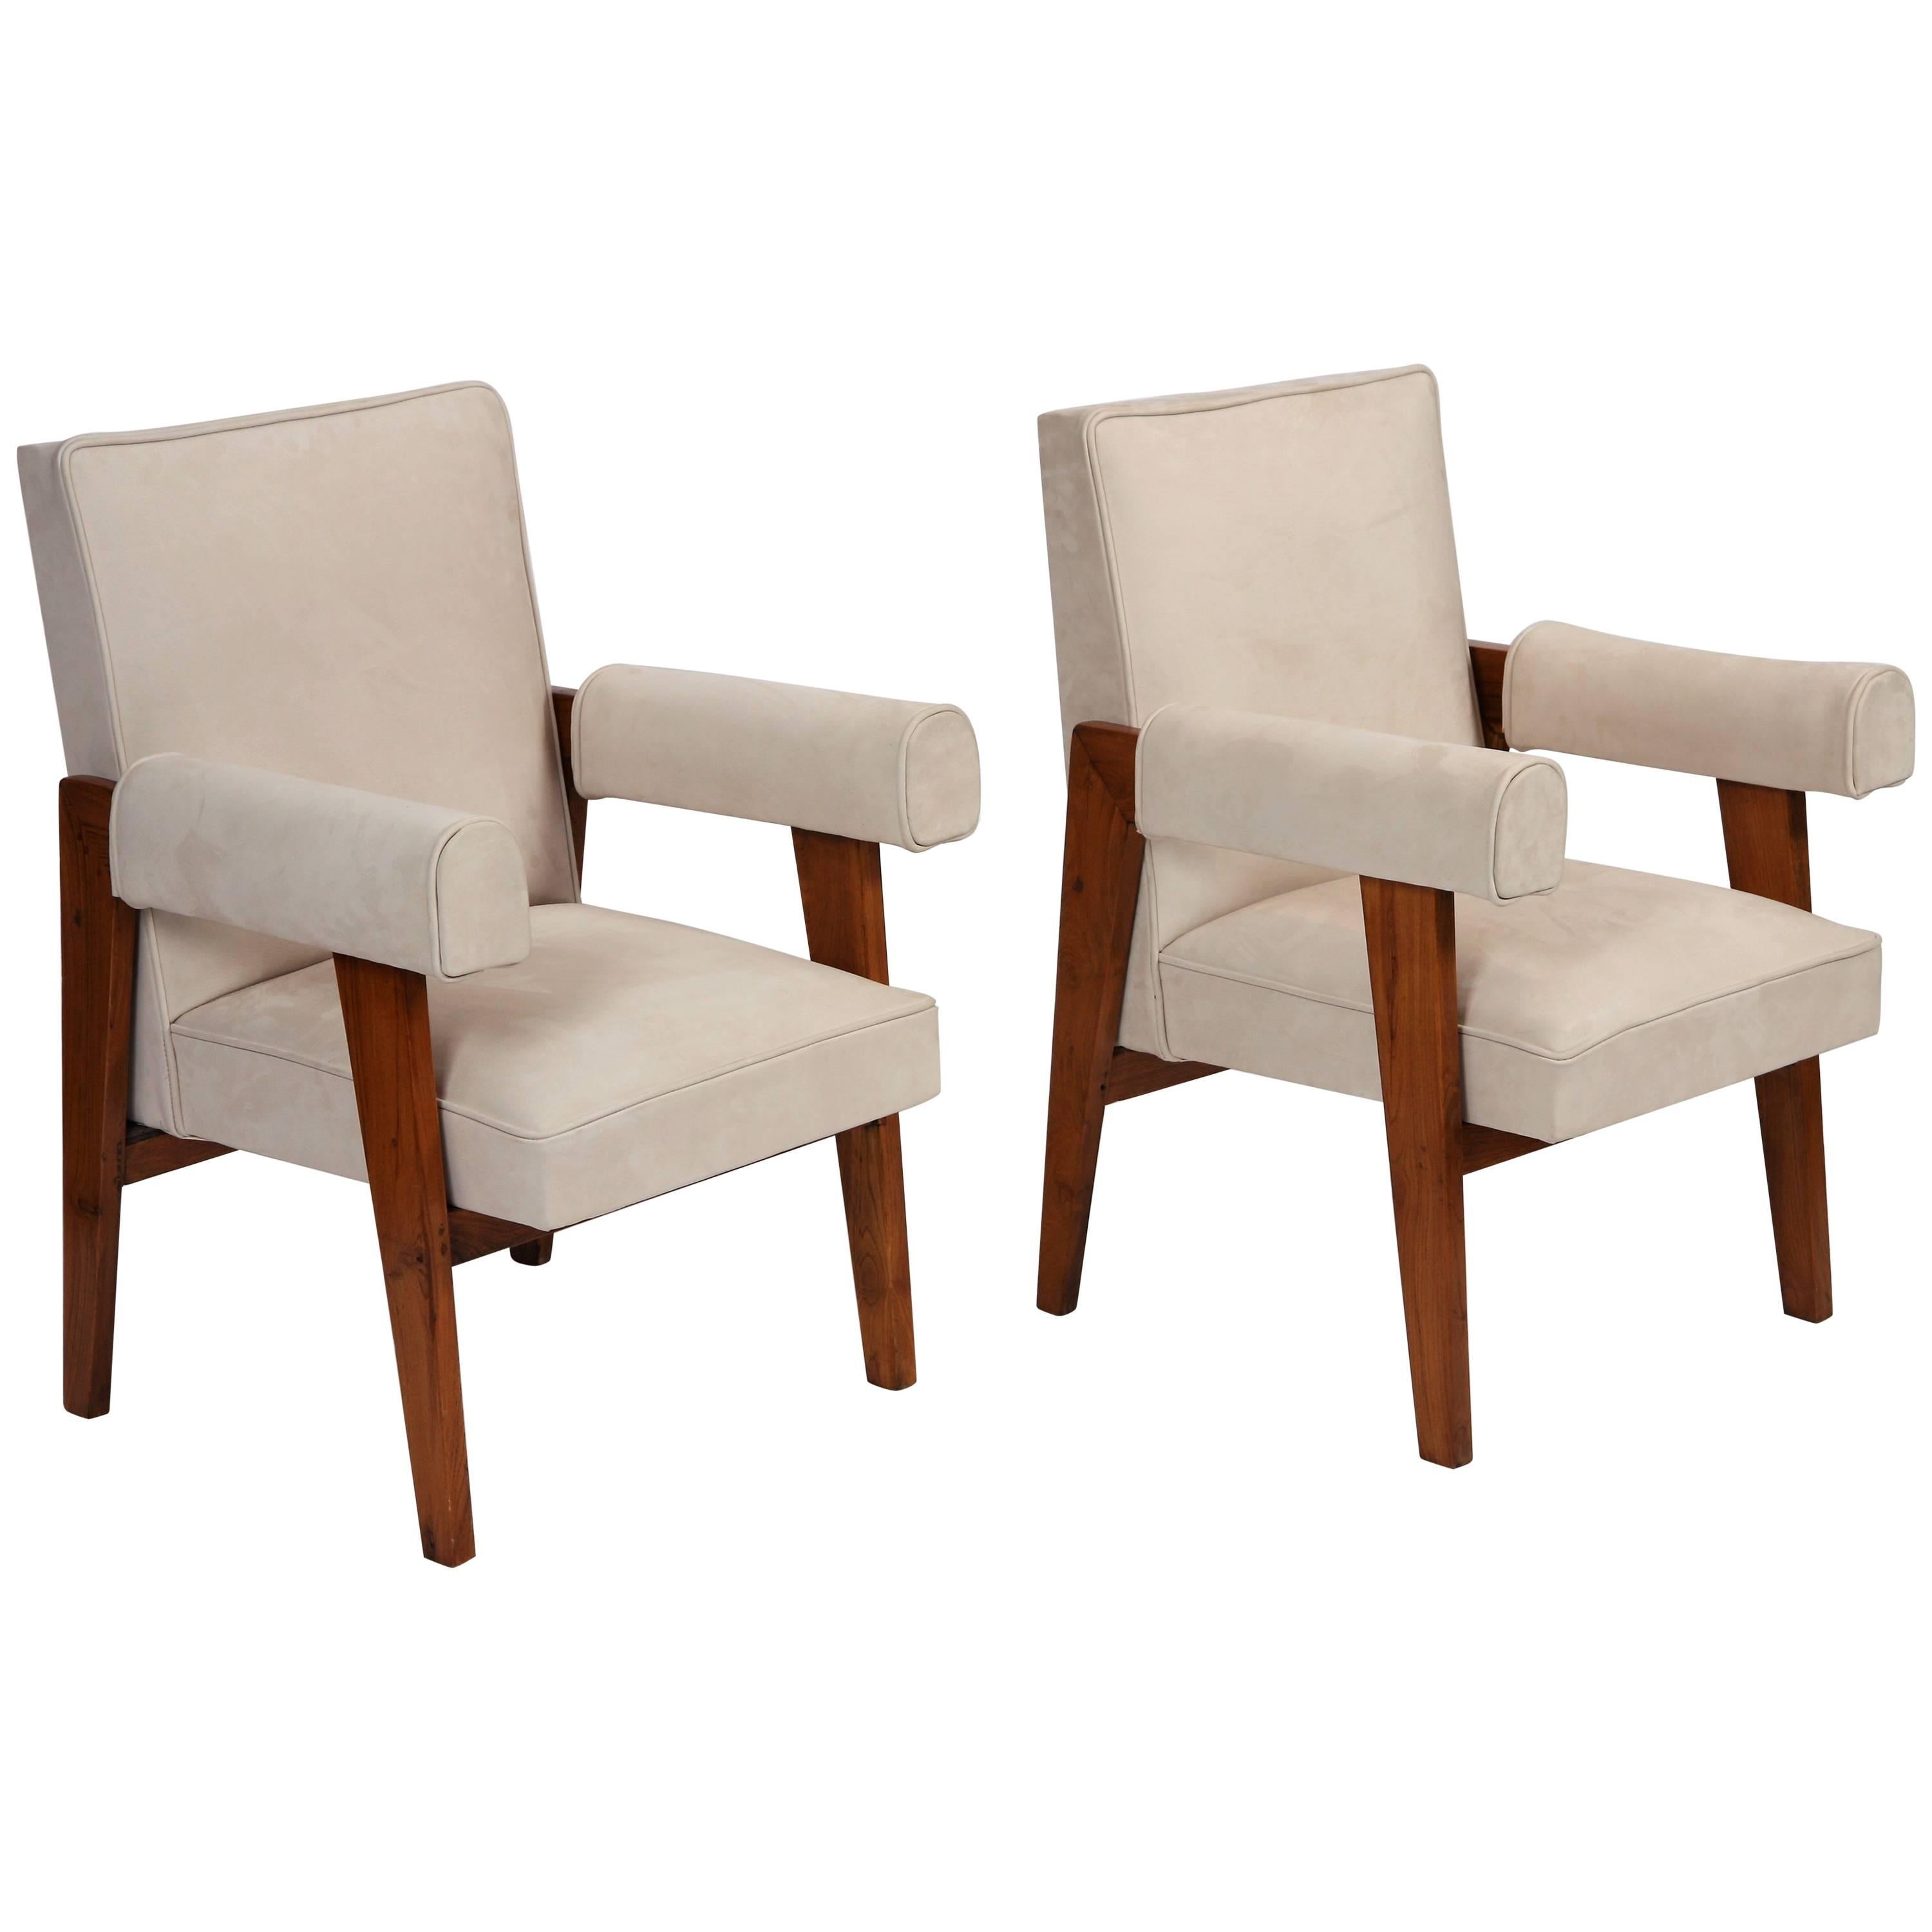 "Avocat" Armchairs by Pierre Jeanneret For Sale